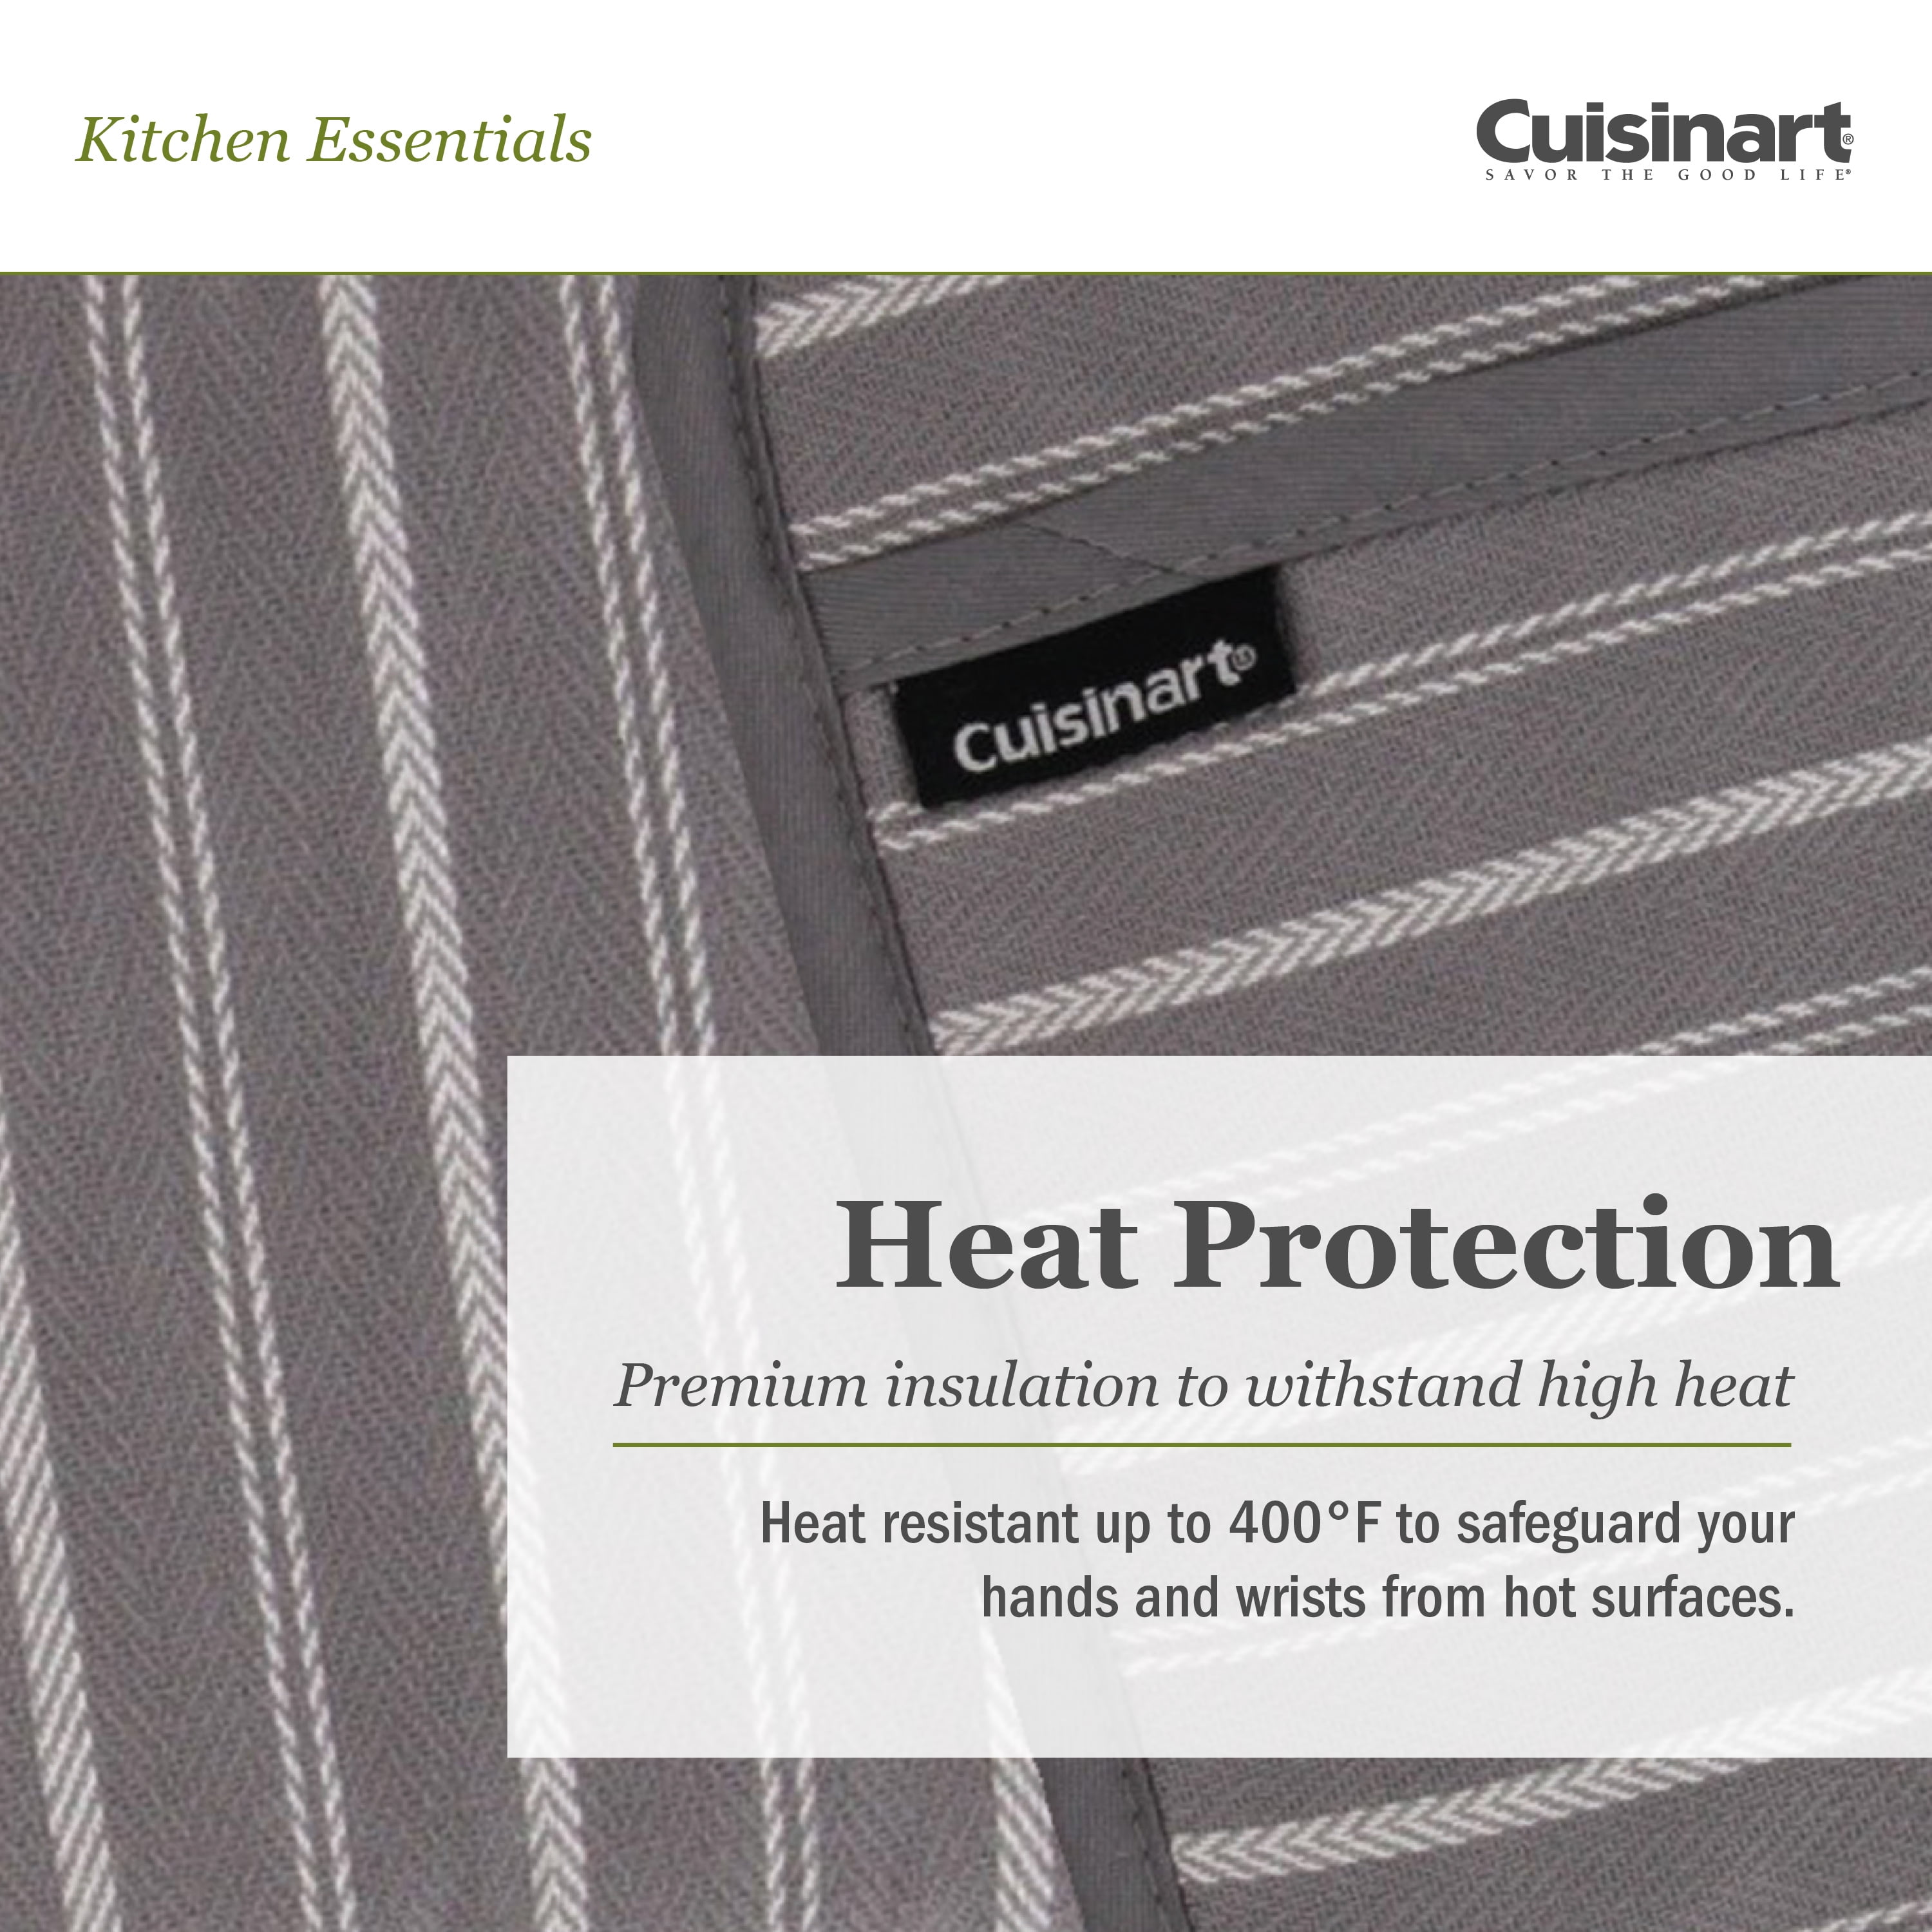 Cuisinart Kitchen Oven Mitt/Glove & Rectangle Potholder with Pocket Set  w/Neoprene for Easy Gripping, Heat Resistant up to 500 degrees F, Twill  Stripe- Red Dahlia 